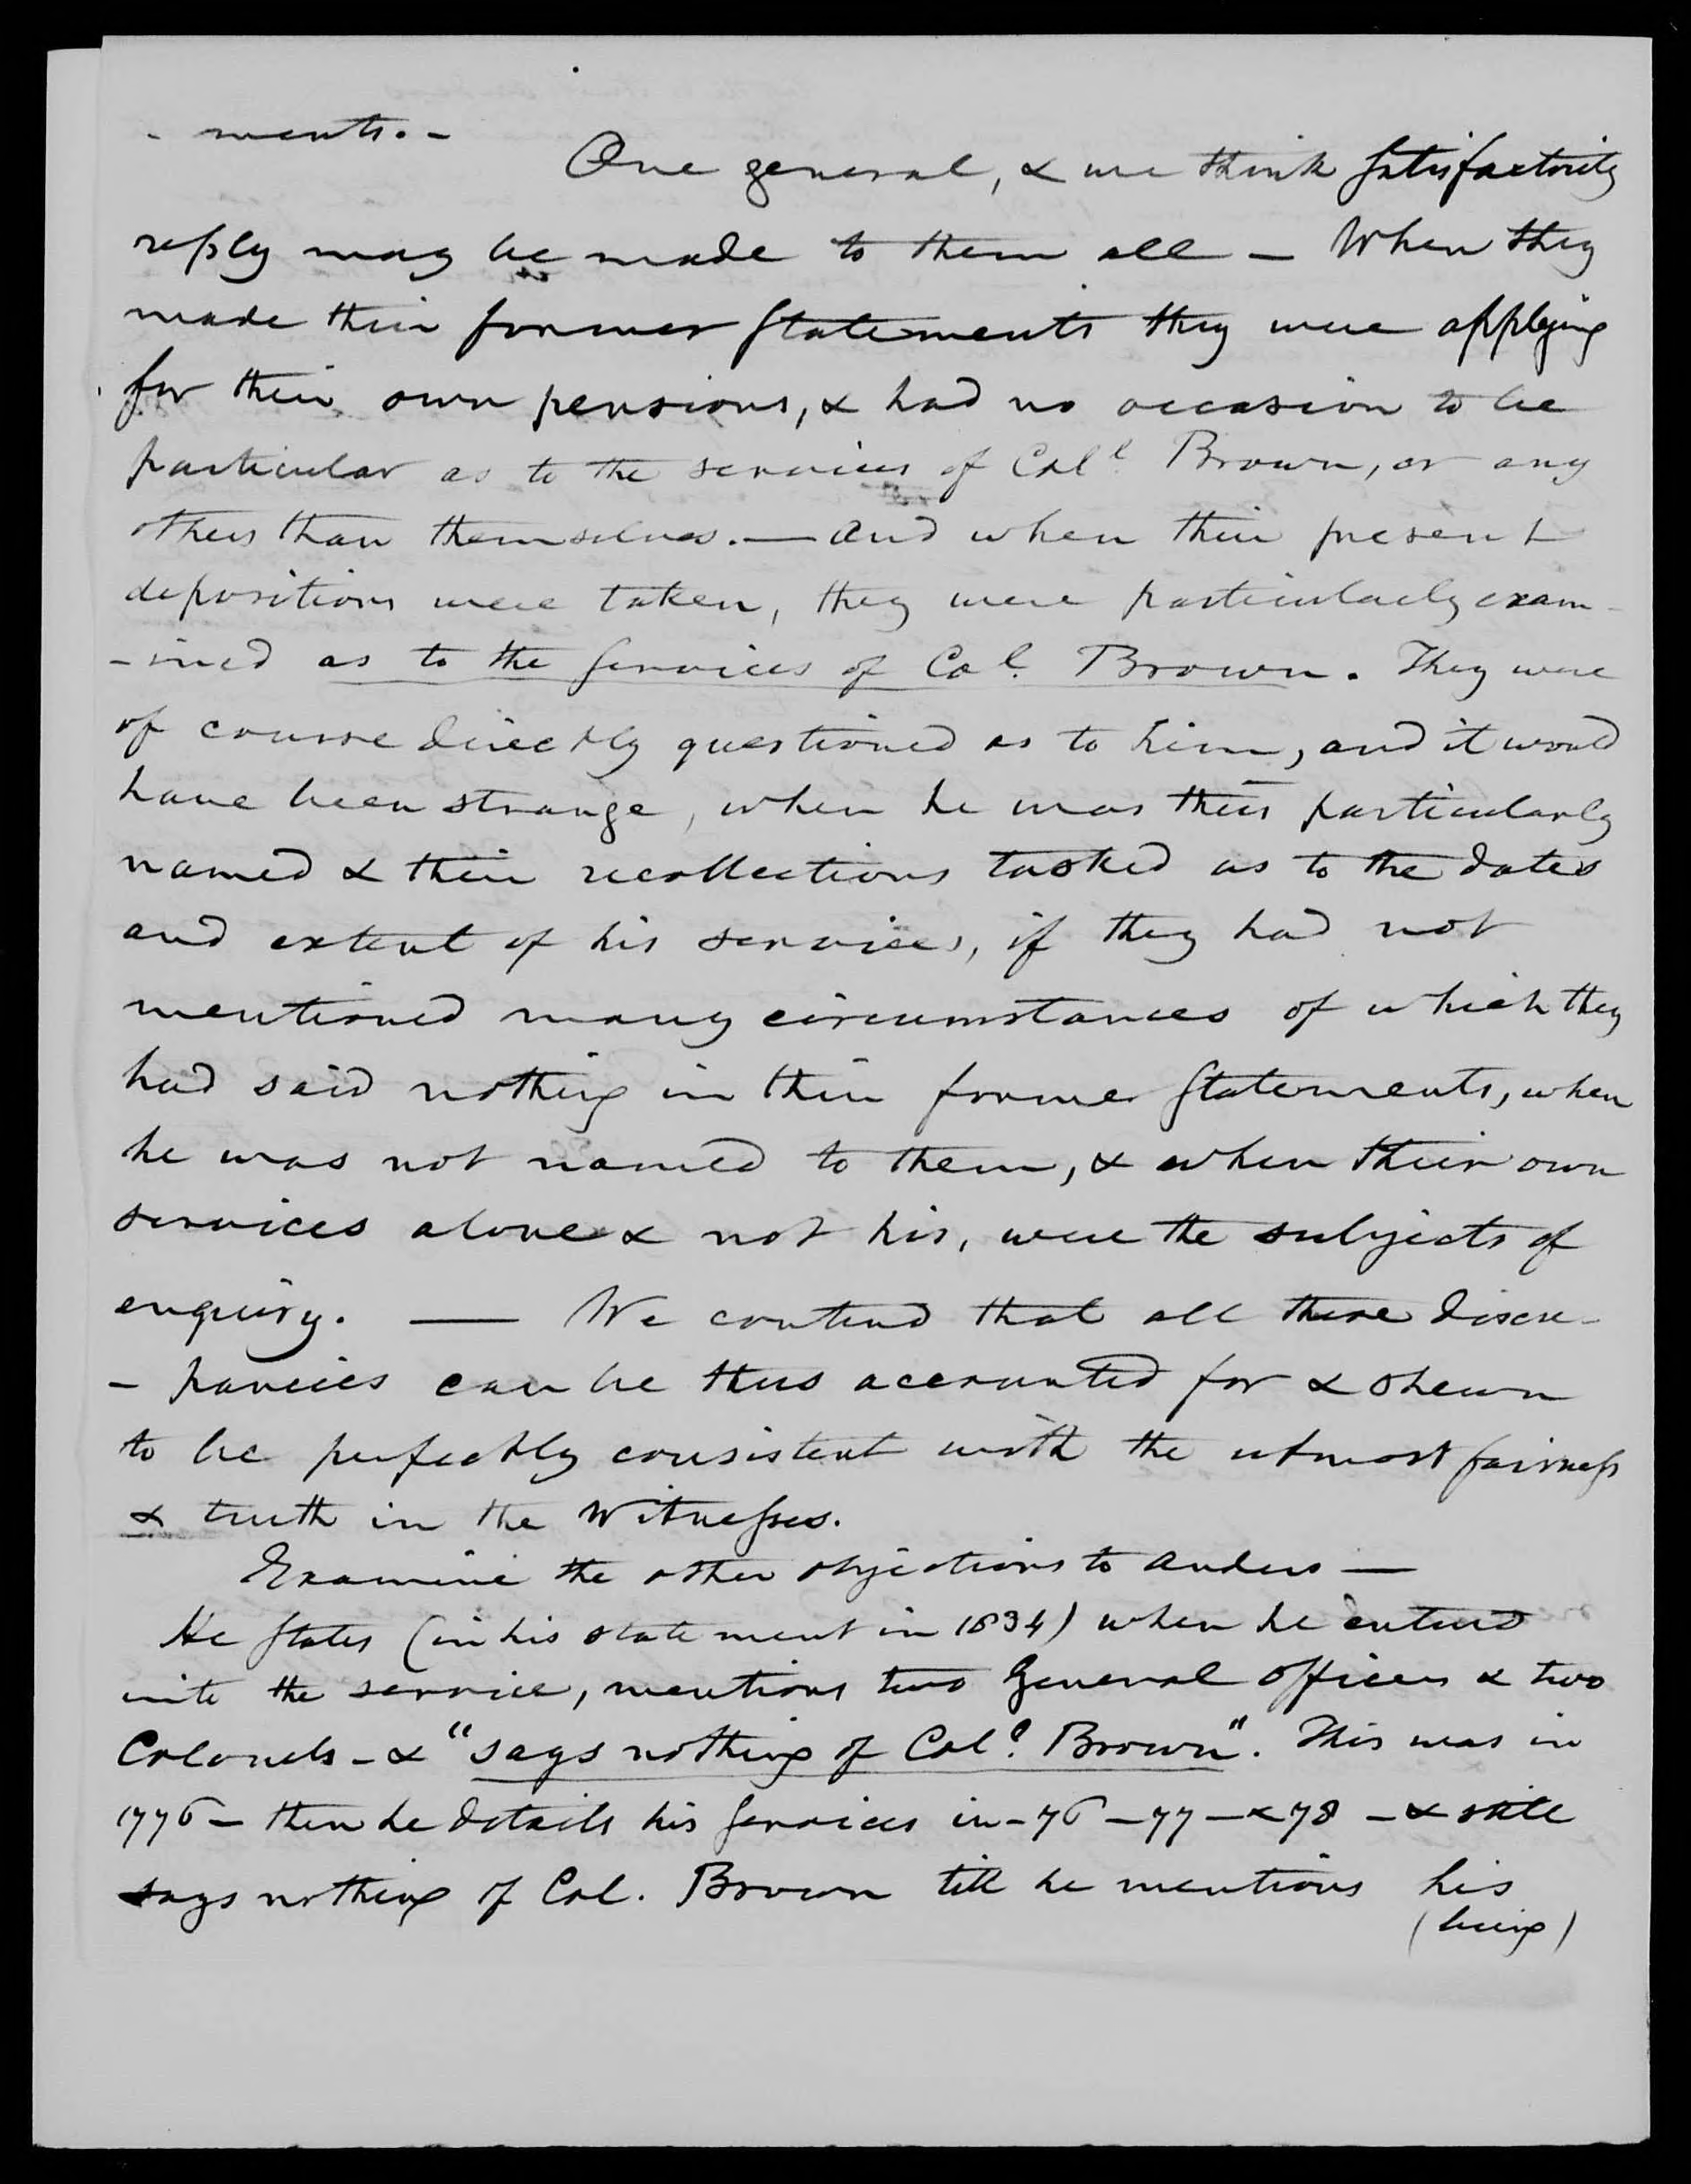 Letter from R. H. Mosby and Lucy Brown to the United States Pension Office, 19 June 1839, page 6